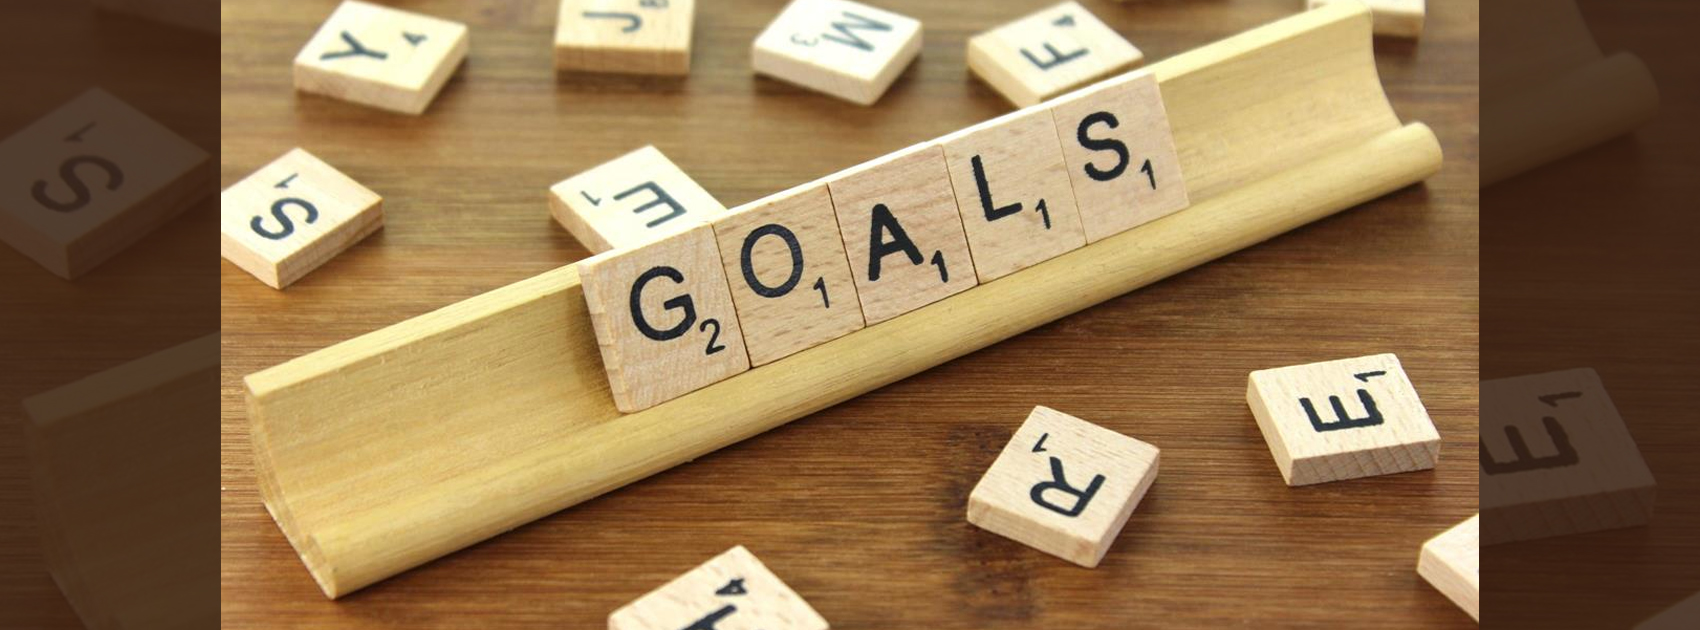 Keep Your Goals to Yourself,Best Motivational Stories 2018,Best Startups in India 2018,Latest Startup News India,startup stories,Steps to Achieve Goals,Personal Development Tips,Life Goals,Achieve Your Dreams,Personal Growth,Motivation Grow Up